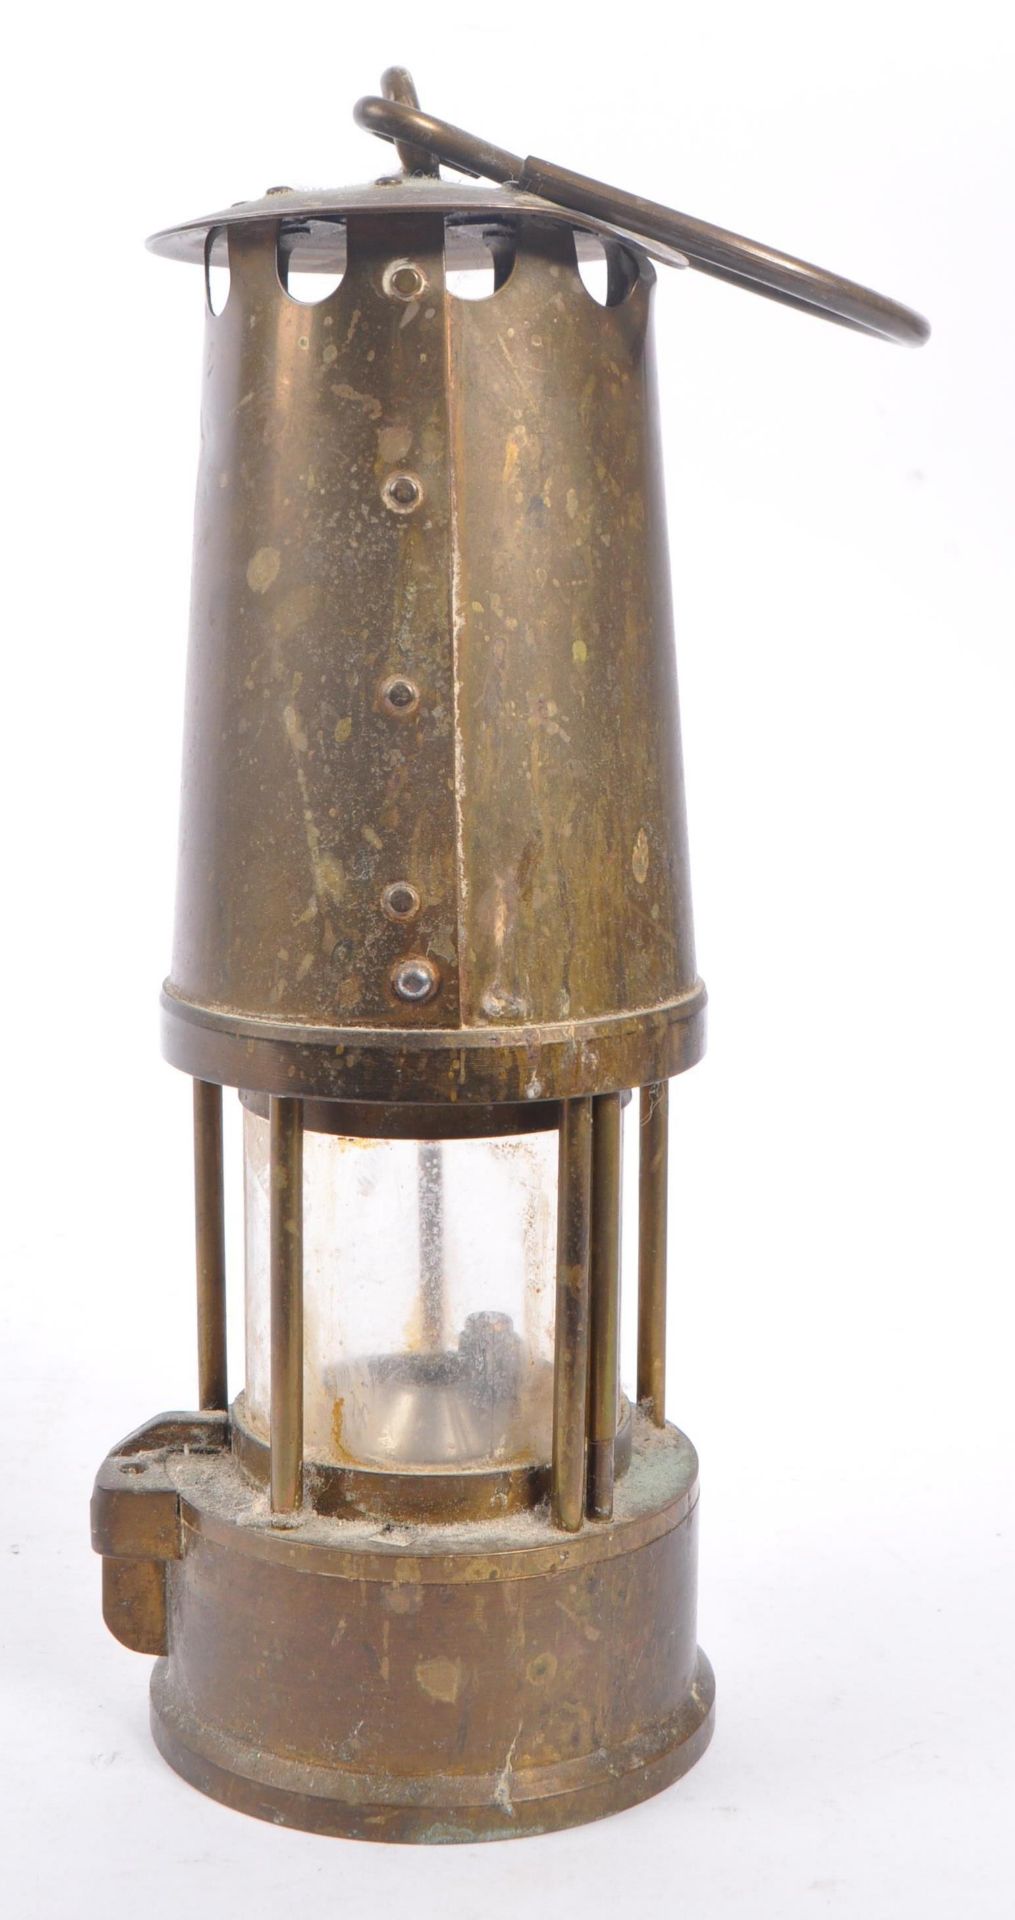 THE PROTECTOR LAMP & LIGHTING - BRASS MINERS LAMP - Image 3 of 6